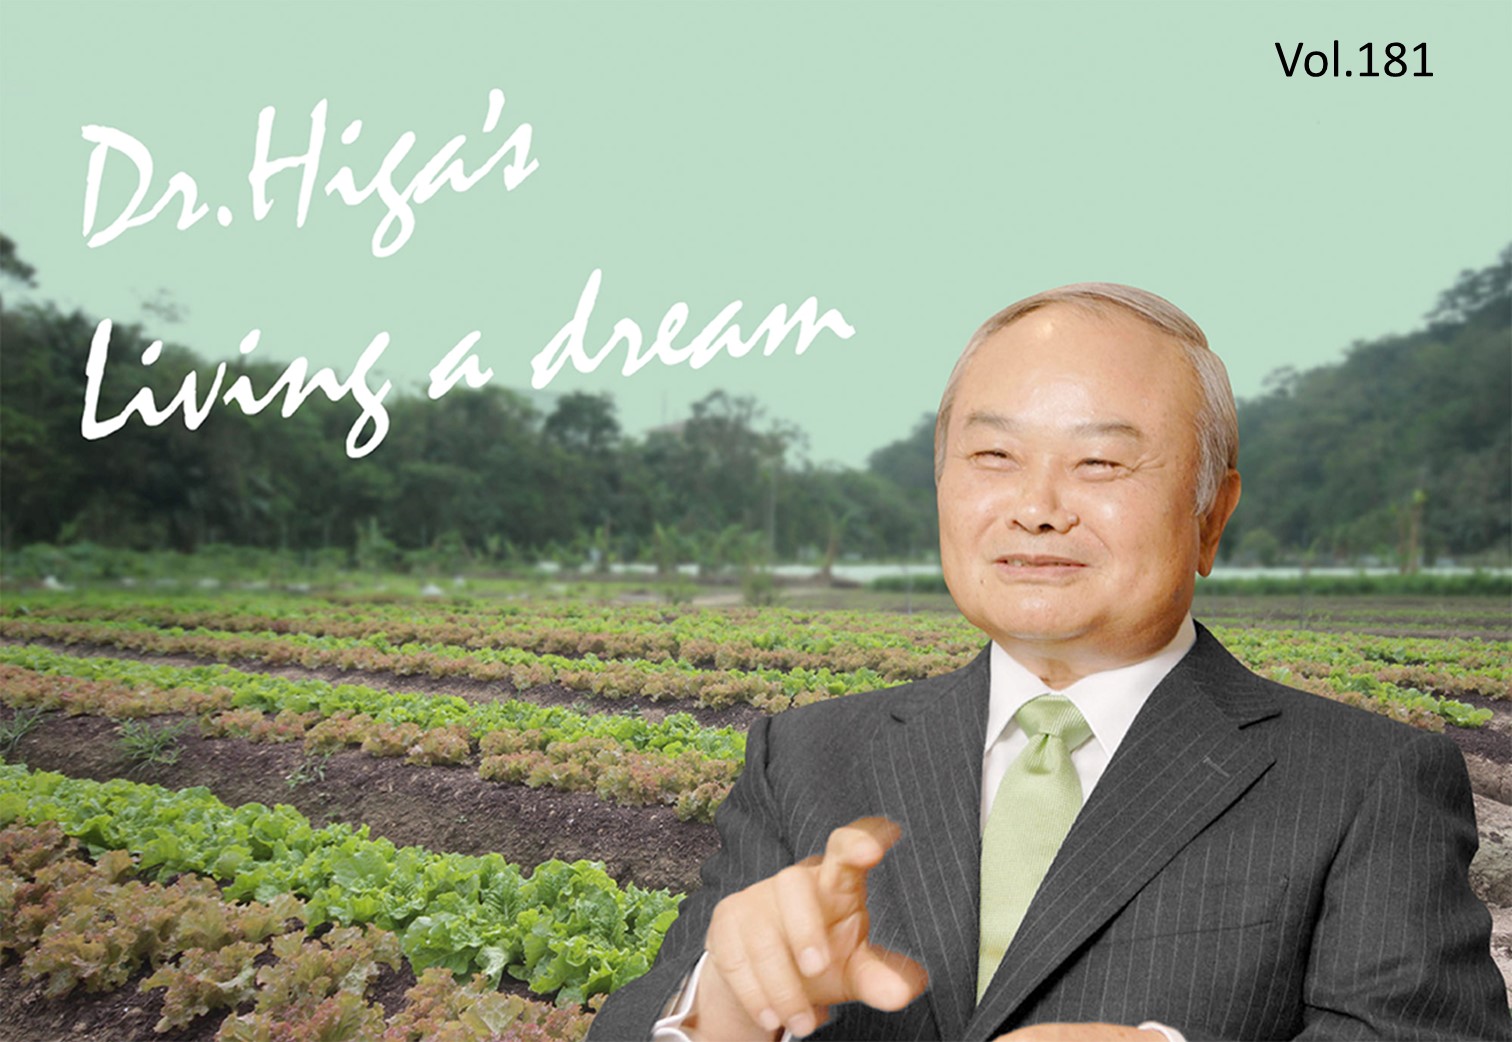 Dr. Higa's "Living a Dream": the latest article #181 is up!!!